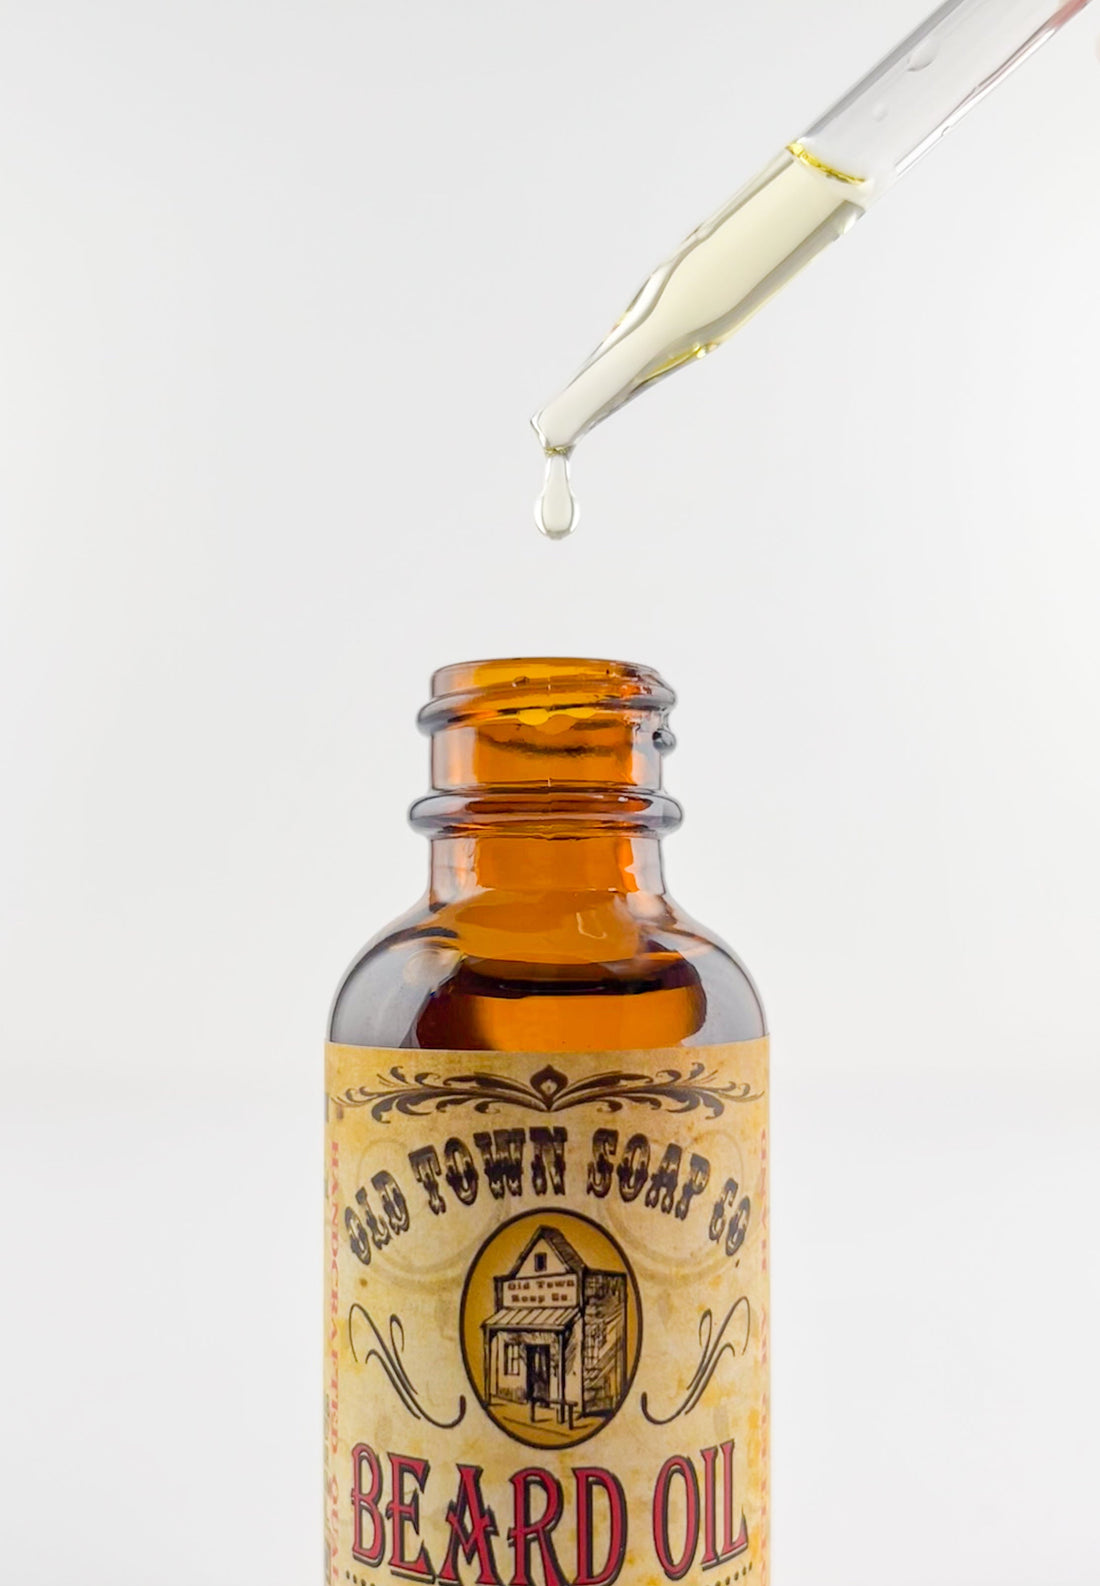 The Viking Beard Oil - Old Town Soap Co.